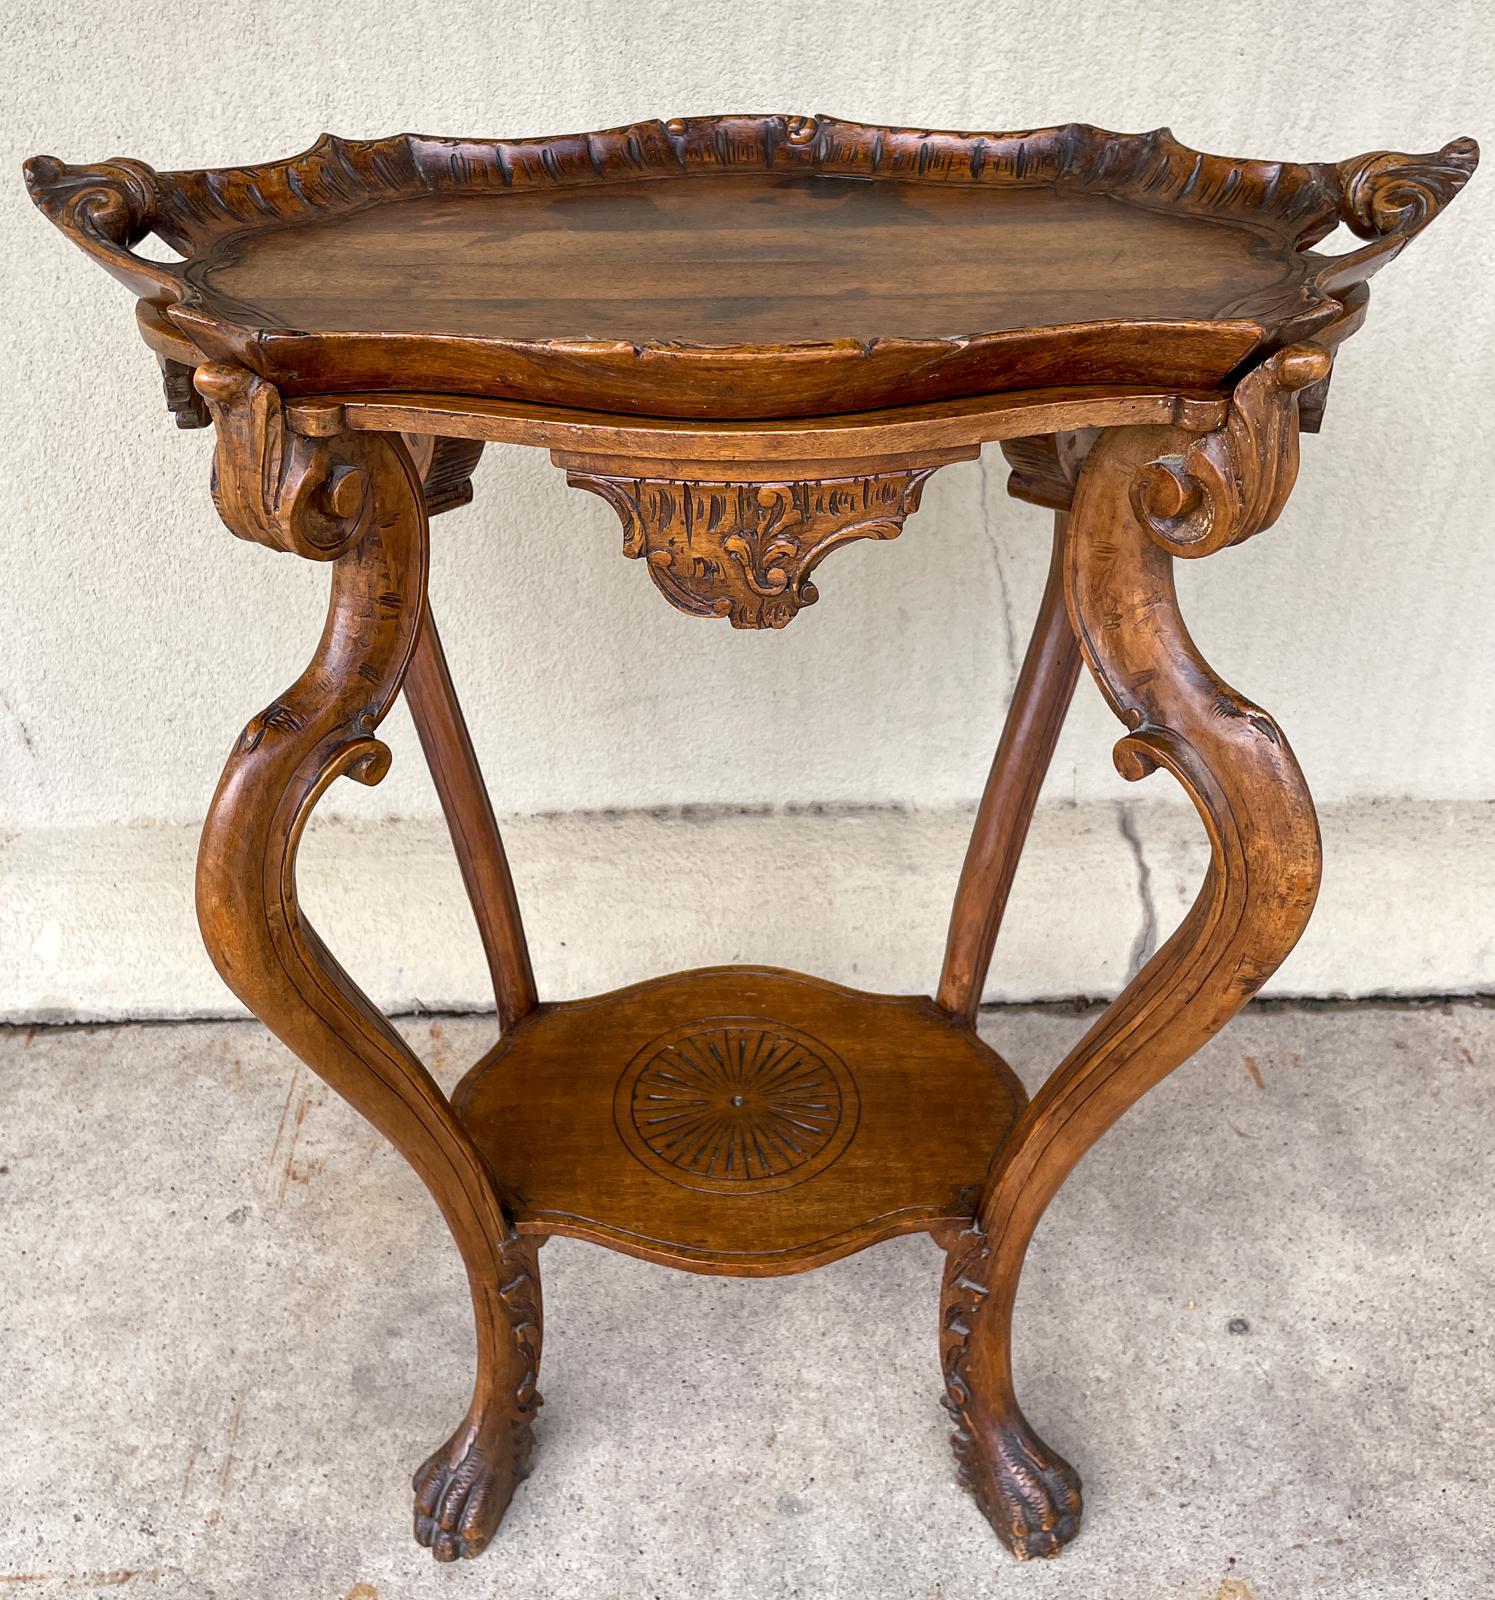 This antique French tray-top side table is crafted in oak and features a number of decorative details, including beautifully curved legs ending in paw feet, a sun medallion on the lower shelf and carved decorative accents on the apron. The top is